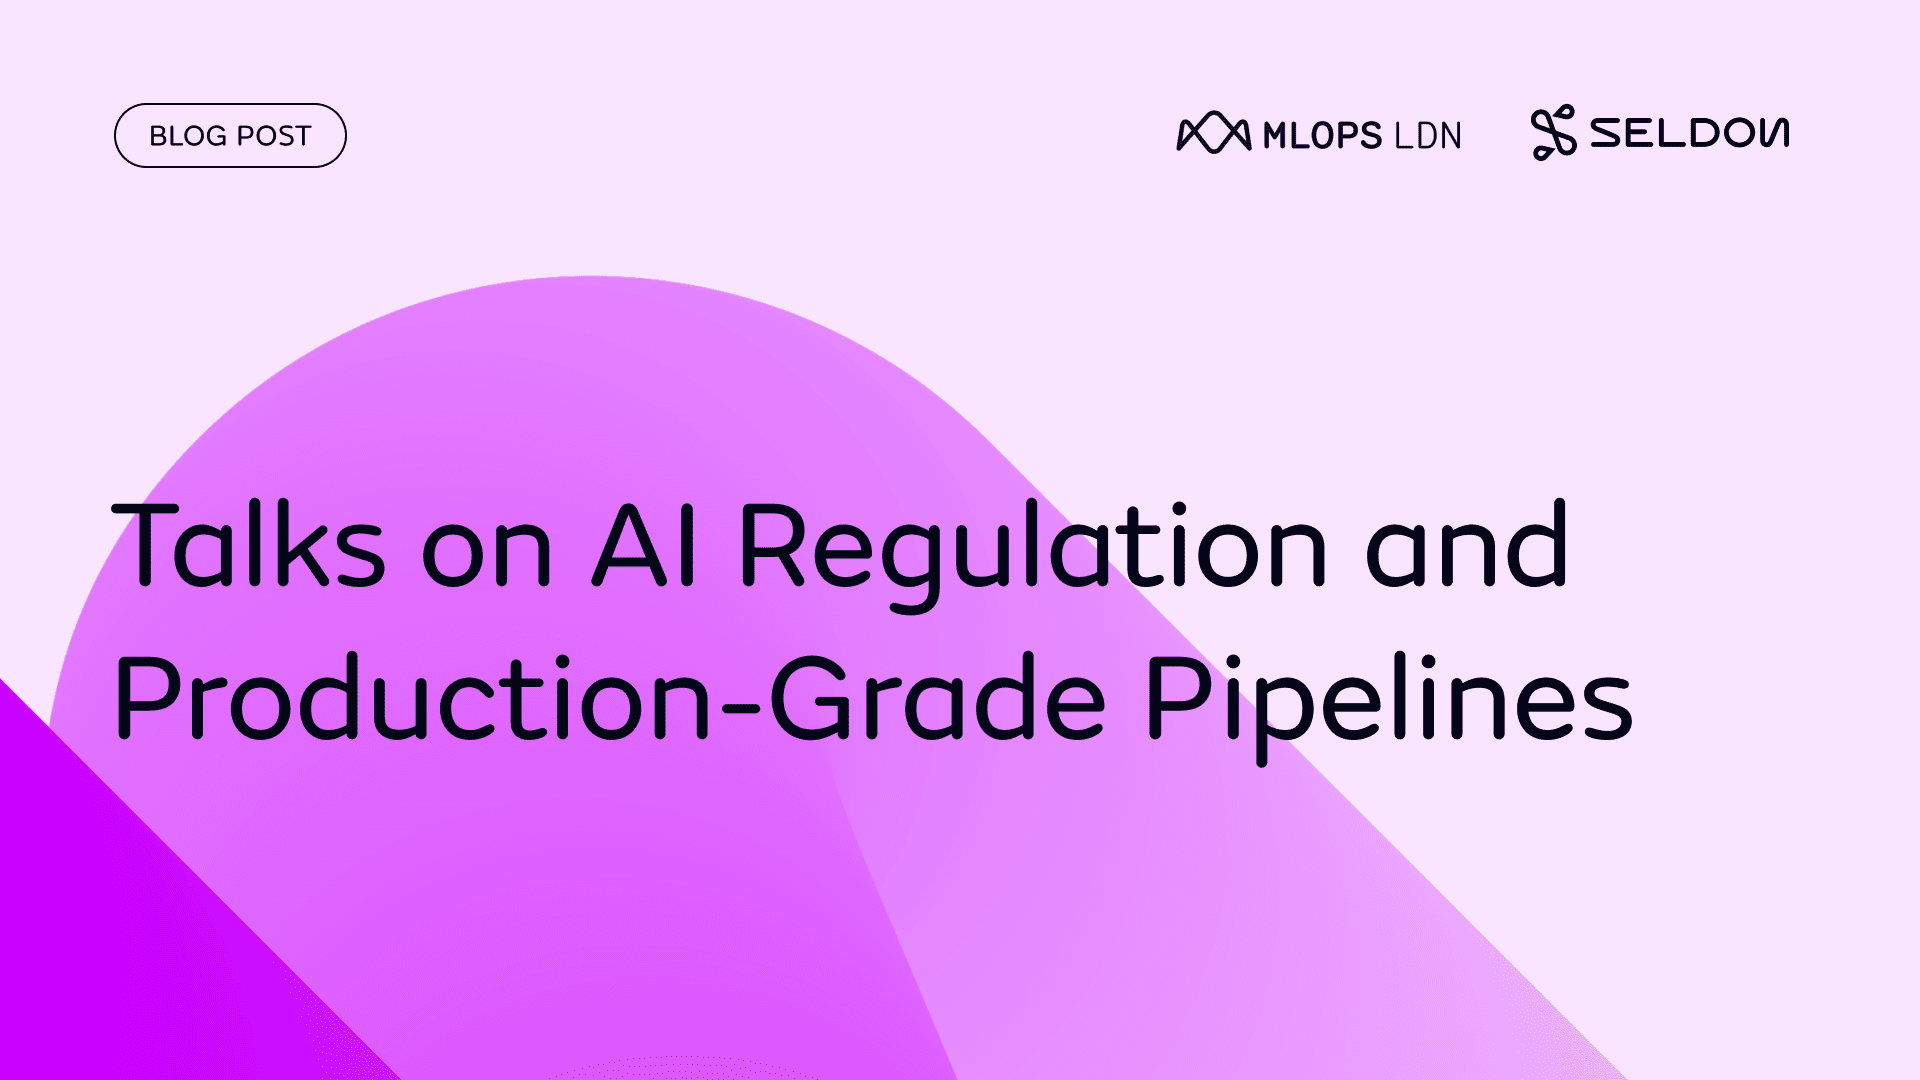 MLOps London July: Talks on AI Regulation and Production-Grade Pipelines